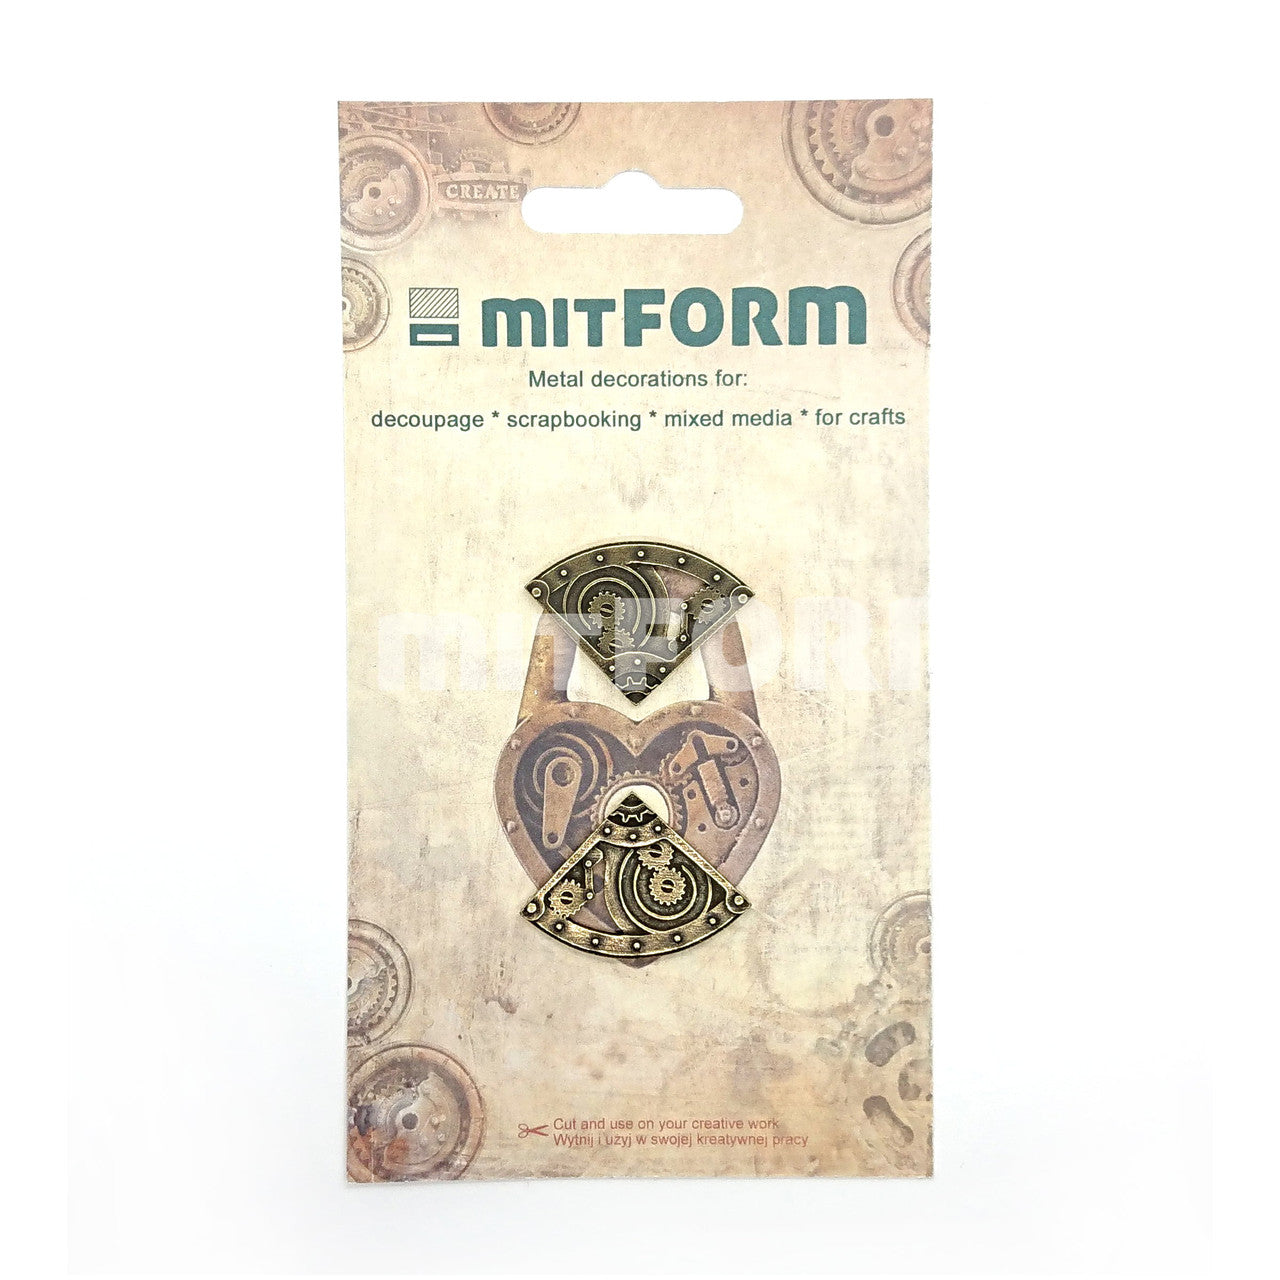 Mitform Corners 1 metal findings and castings for mixed media art projects available at Milton's Daughter. Package photo